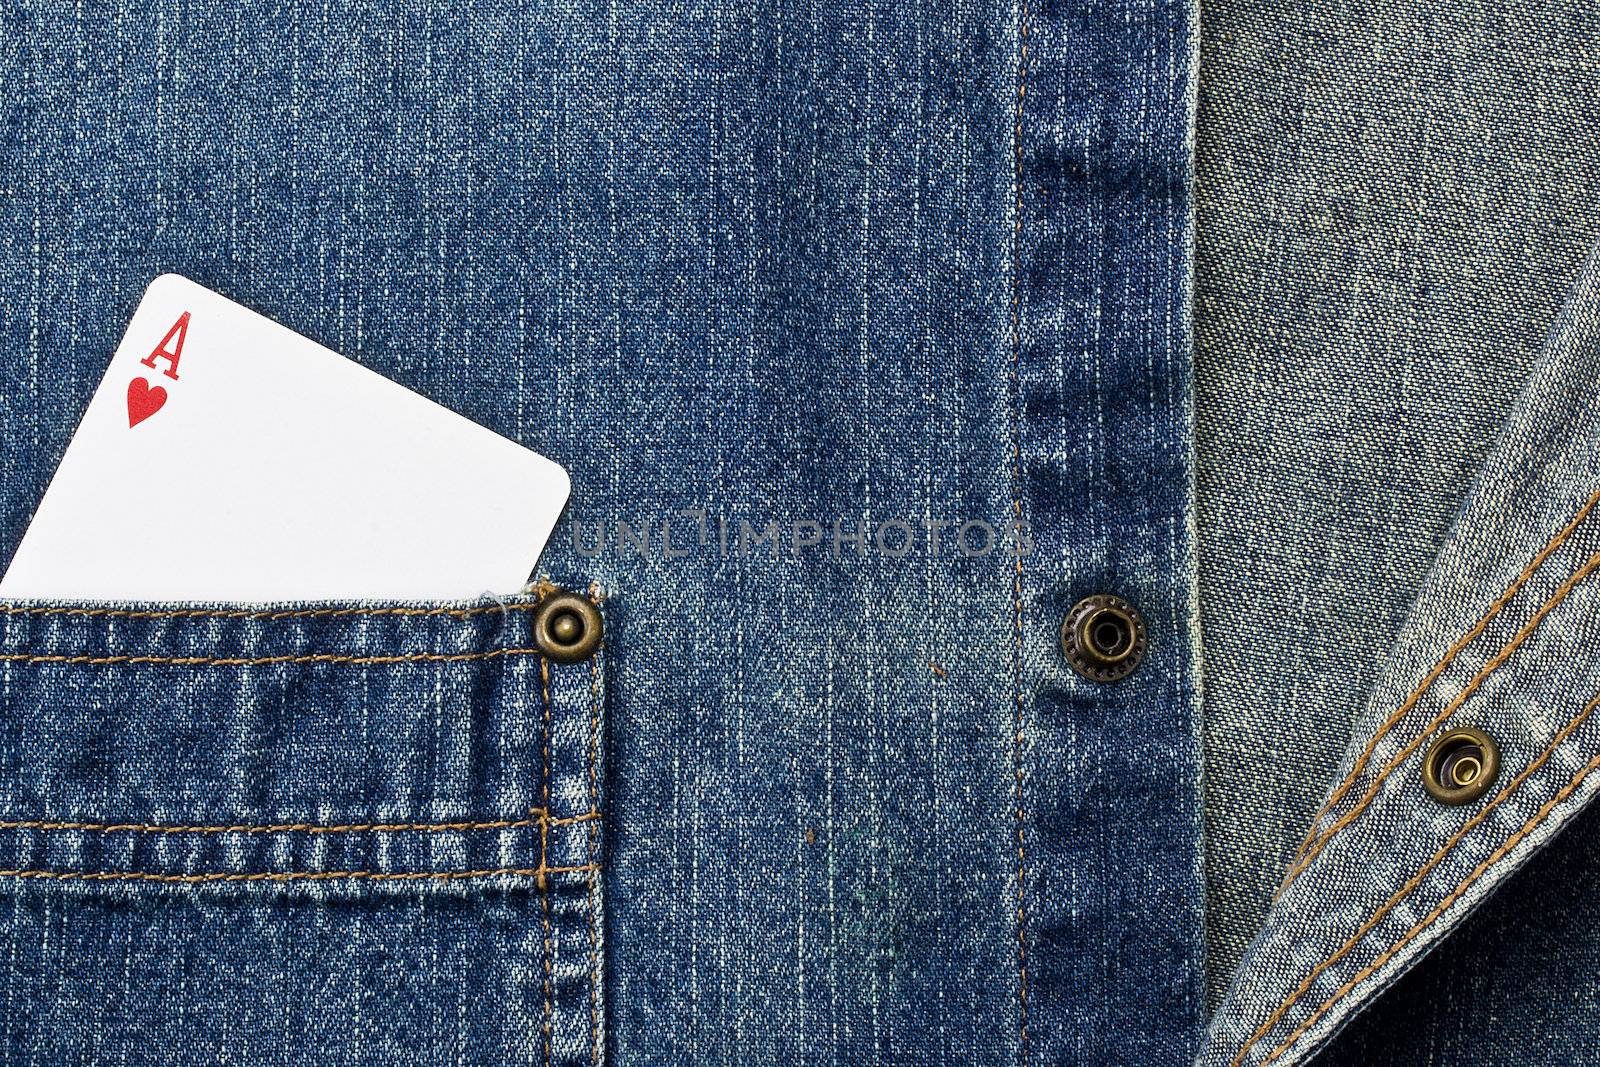 Close-up photograph of a playing card in a denim pocket.